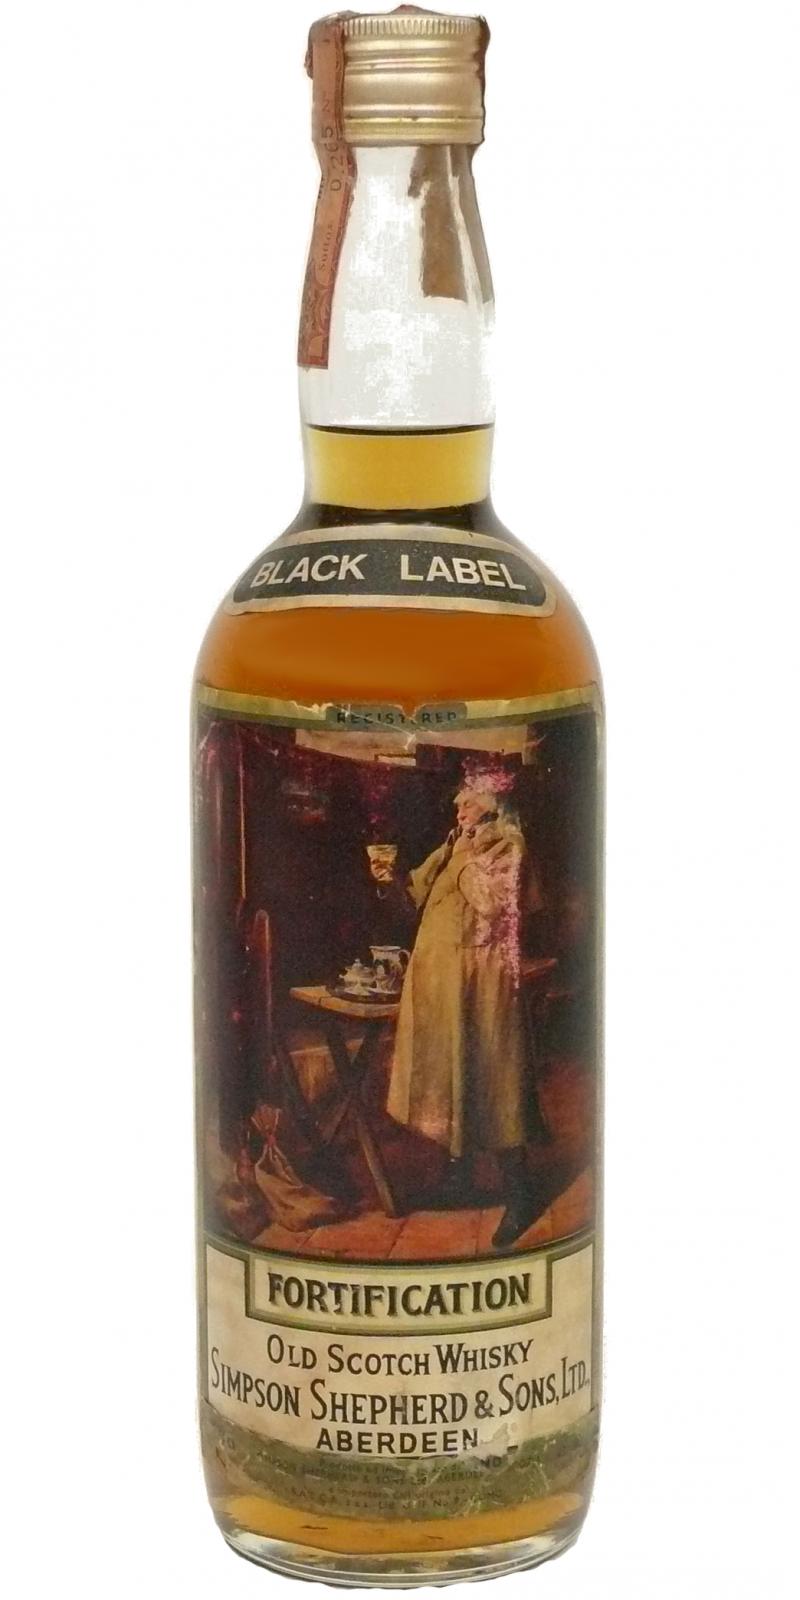 Fortification Black Label Old Scotch Whisky Salca Import Italy 43% 750ml